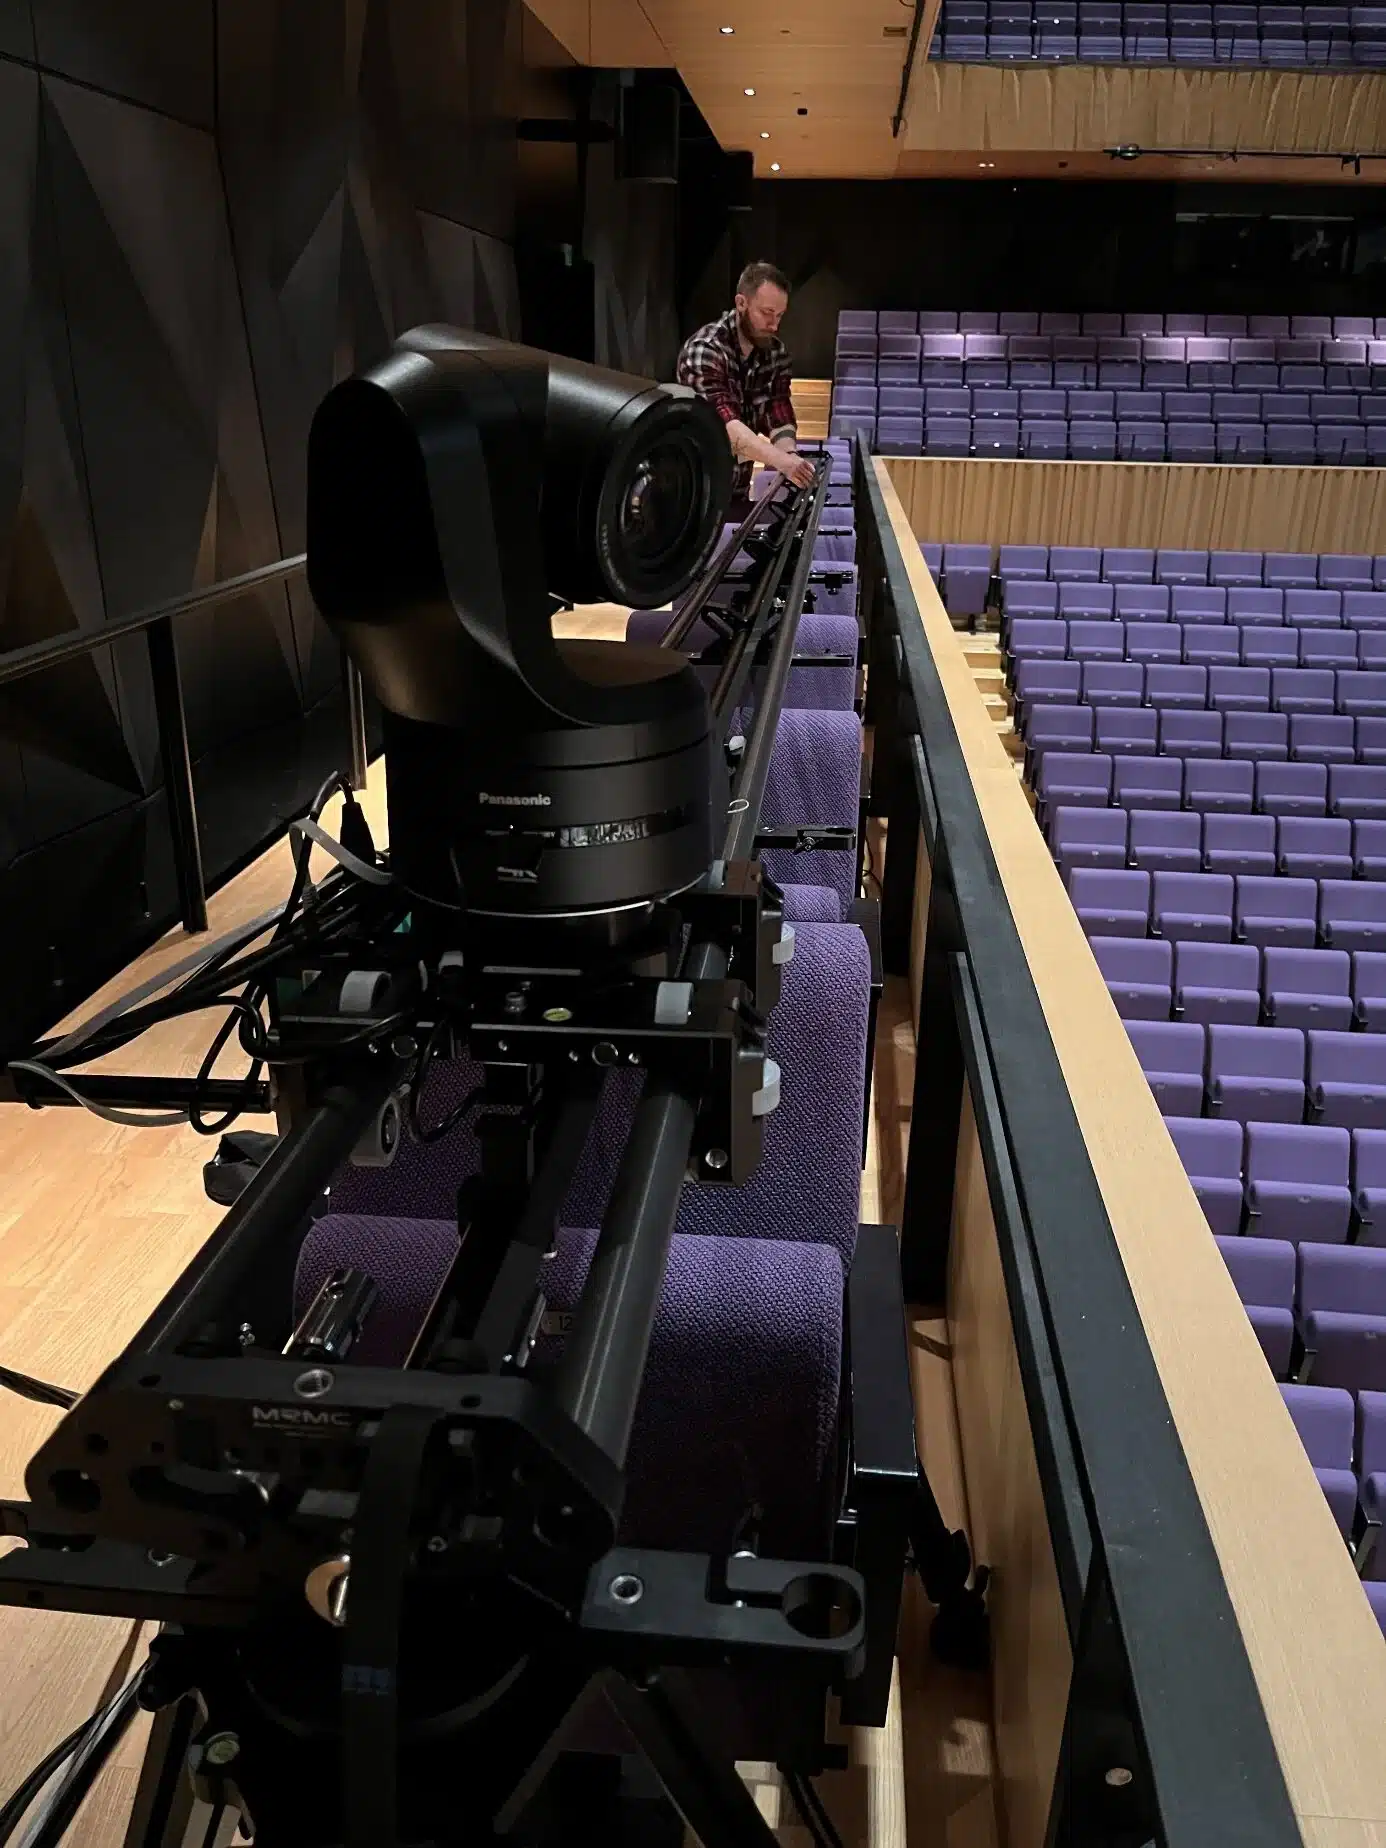 The QRS demo system was set up and ready for use at the Kilden Theater and Concert Hall.